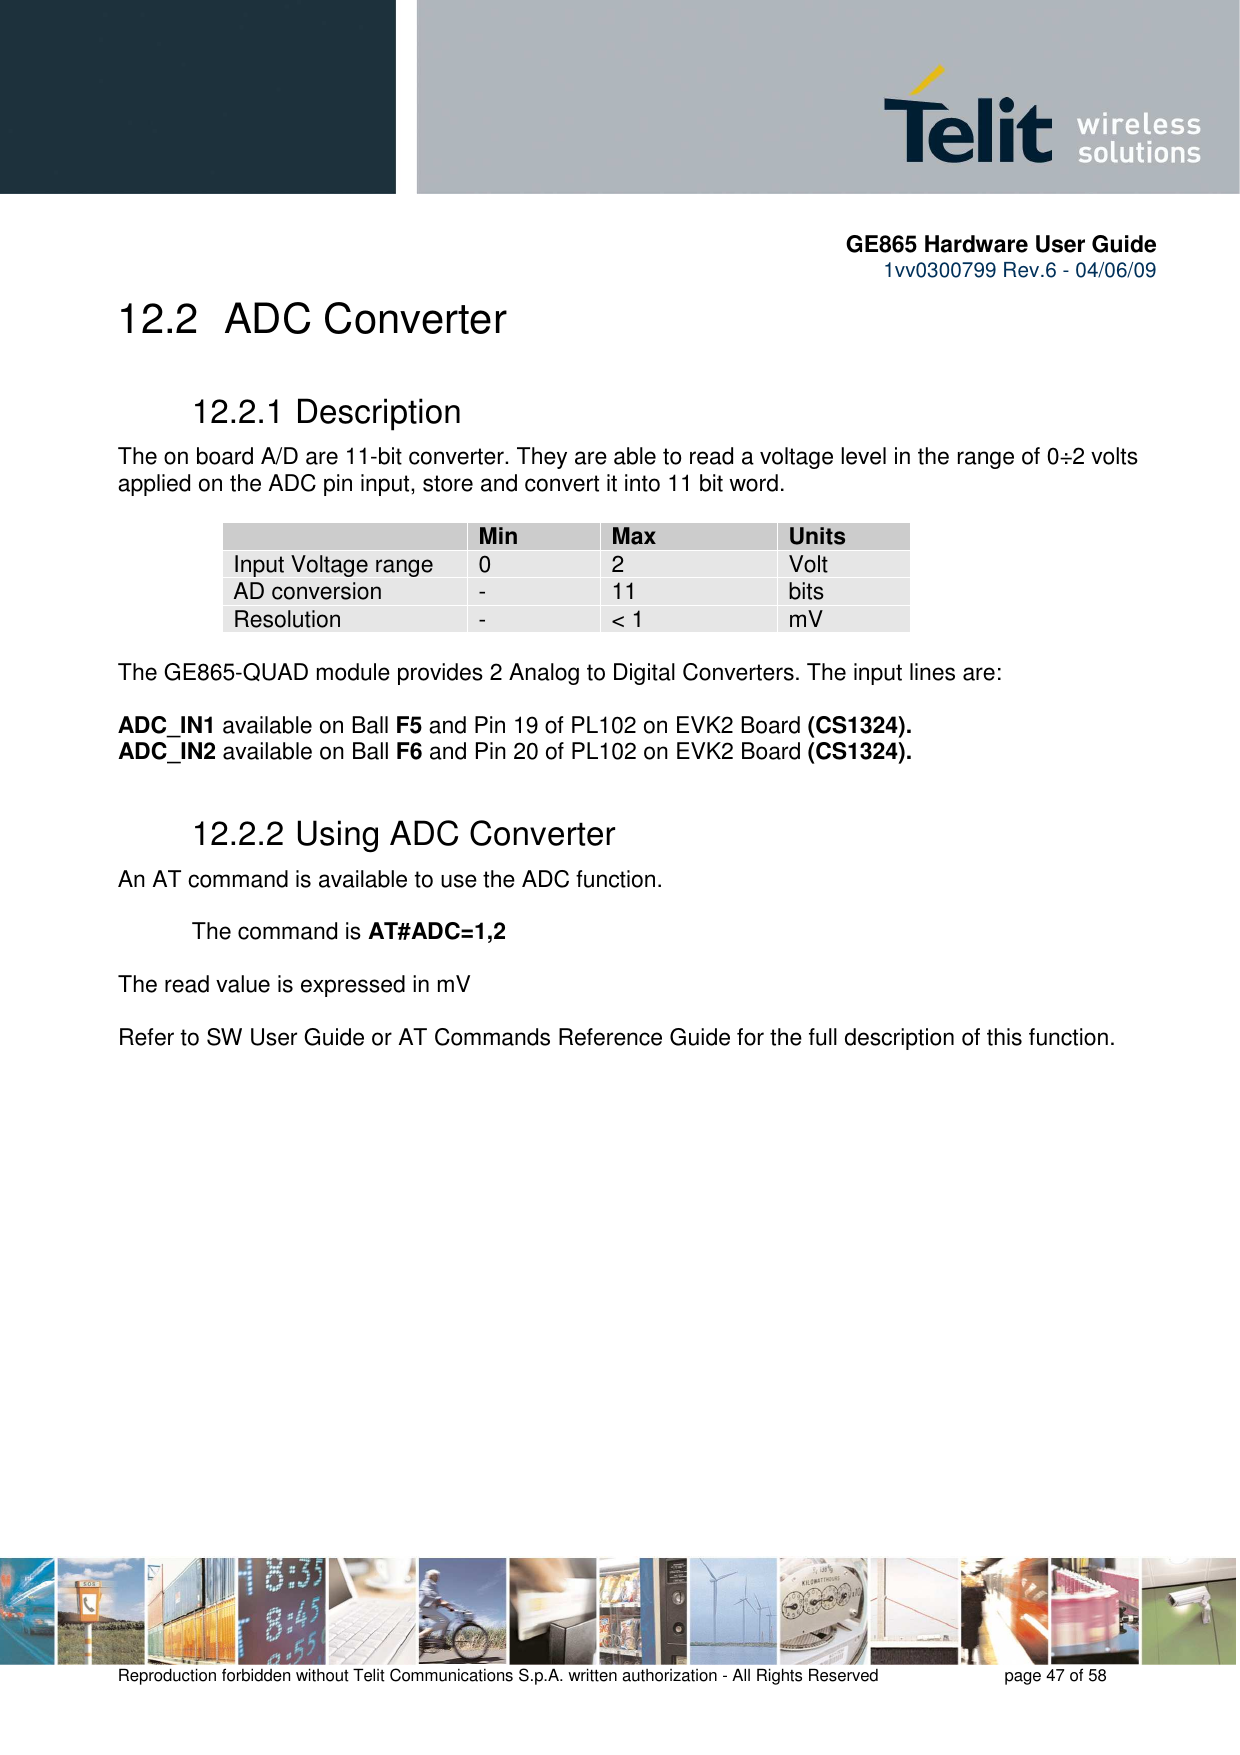       GE865 Hardware User Guide 1vv0300799 Rev.6 - 04/06/09      Reproduction forbidden without Telit Communications S.p.A. written authorization - All Rights Reserved    page 47 of 58  12.2   ADC Converter 12.2.1 Description The on board A/D are 11-bit converter. They are able to read a voltage level in the range of 0÷2 volts applied on the ADC pin input, store and convert it into 11 bit word.    Min Max Units Input Voltage range  0  2  Volt AD conversion  -  11  bits Resolution  -  &lt; 1  mV  The GE865-QUAD module provides 2 Analog to Digital Converters. The input lines are:  ADC_IN1 available on Ball F5 and Pin 19 of PL102 on EVK2 Board (CS1324). ADC_IN2 available on Ball F6 and Pin 20 of PL102 on EVK2 Board (CS1324). 12.2.2 Using ADC Converter An AT command is available to use the ADC function.  The command is AT#ADC=1,2  The read value is expressed in mV  Refer to SW User Guide or AT Commands Reference Guide for the full description of this function.  